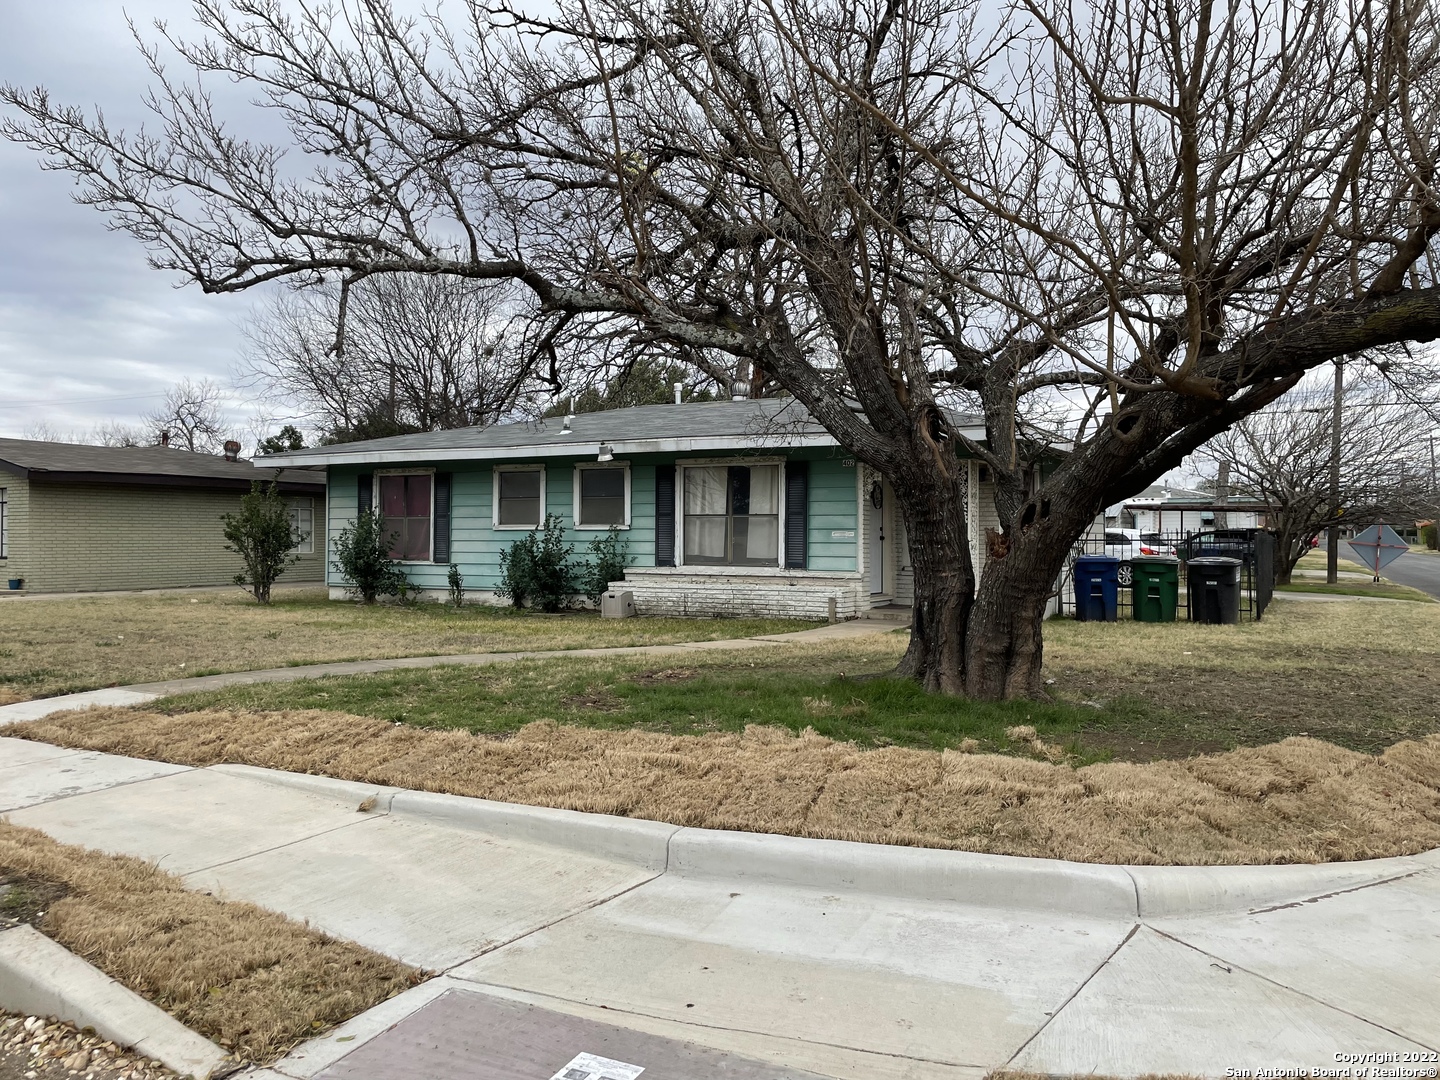 Great investment property with good standing tenants. Spacious home  with over 1500 square feet. Great Corner lot walking distance to Carver Library, Coca Cola Company & AT&T Center. Minutes from downtown, and easy access to I-10. Don't miss out on this amazing investment opportunity!